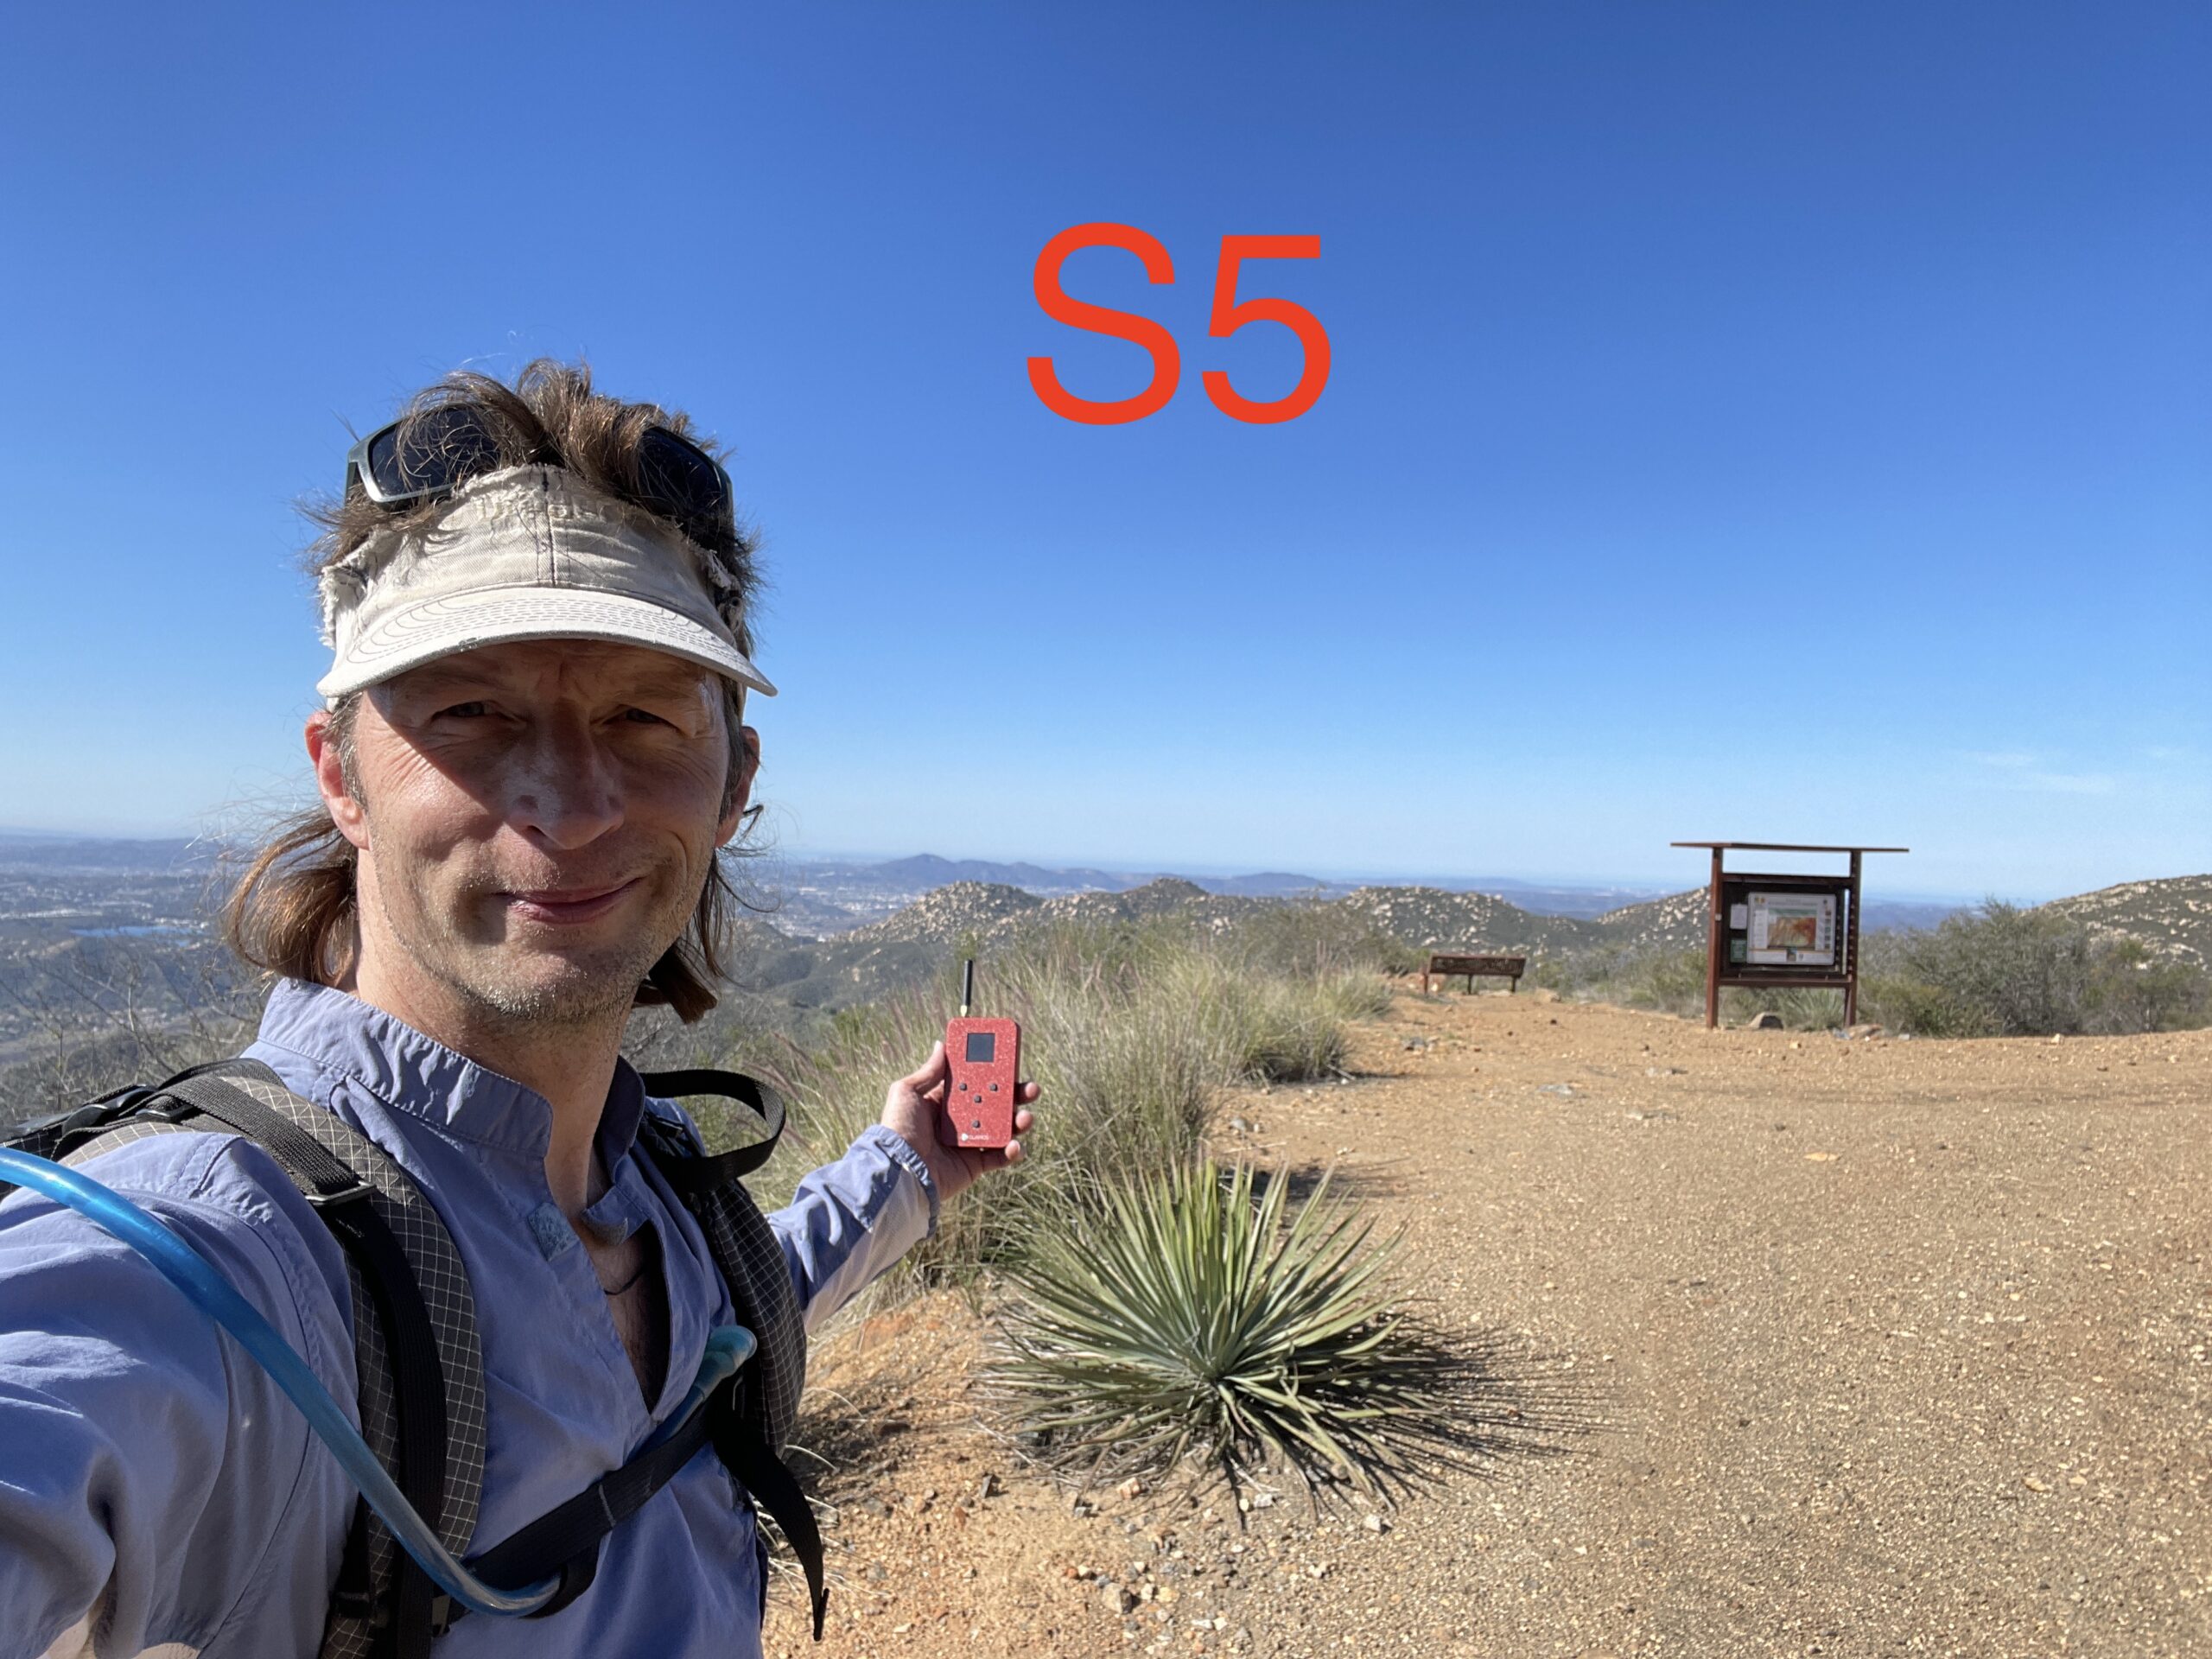 Proposed S5 spot to Measure Alternate Trail Use